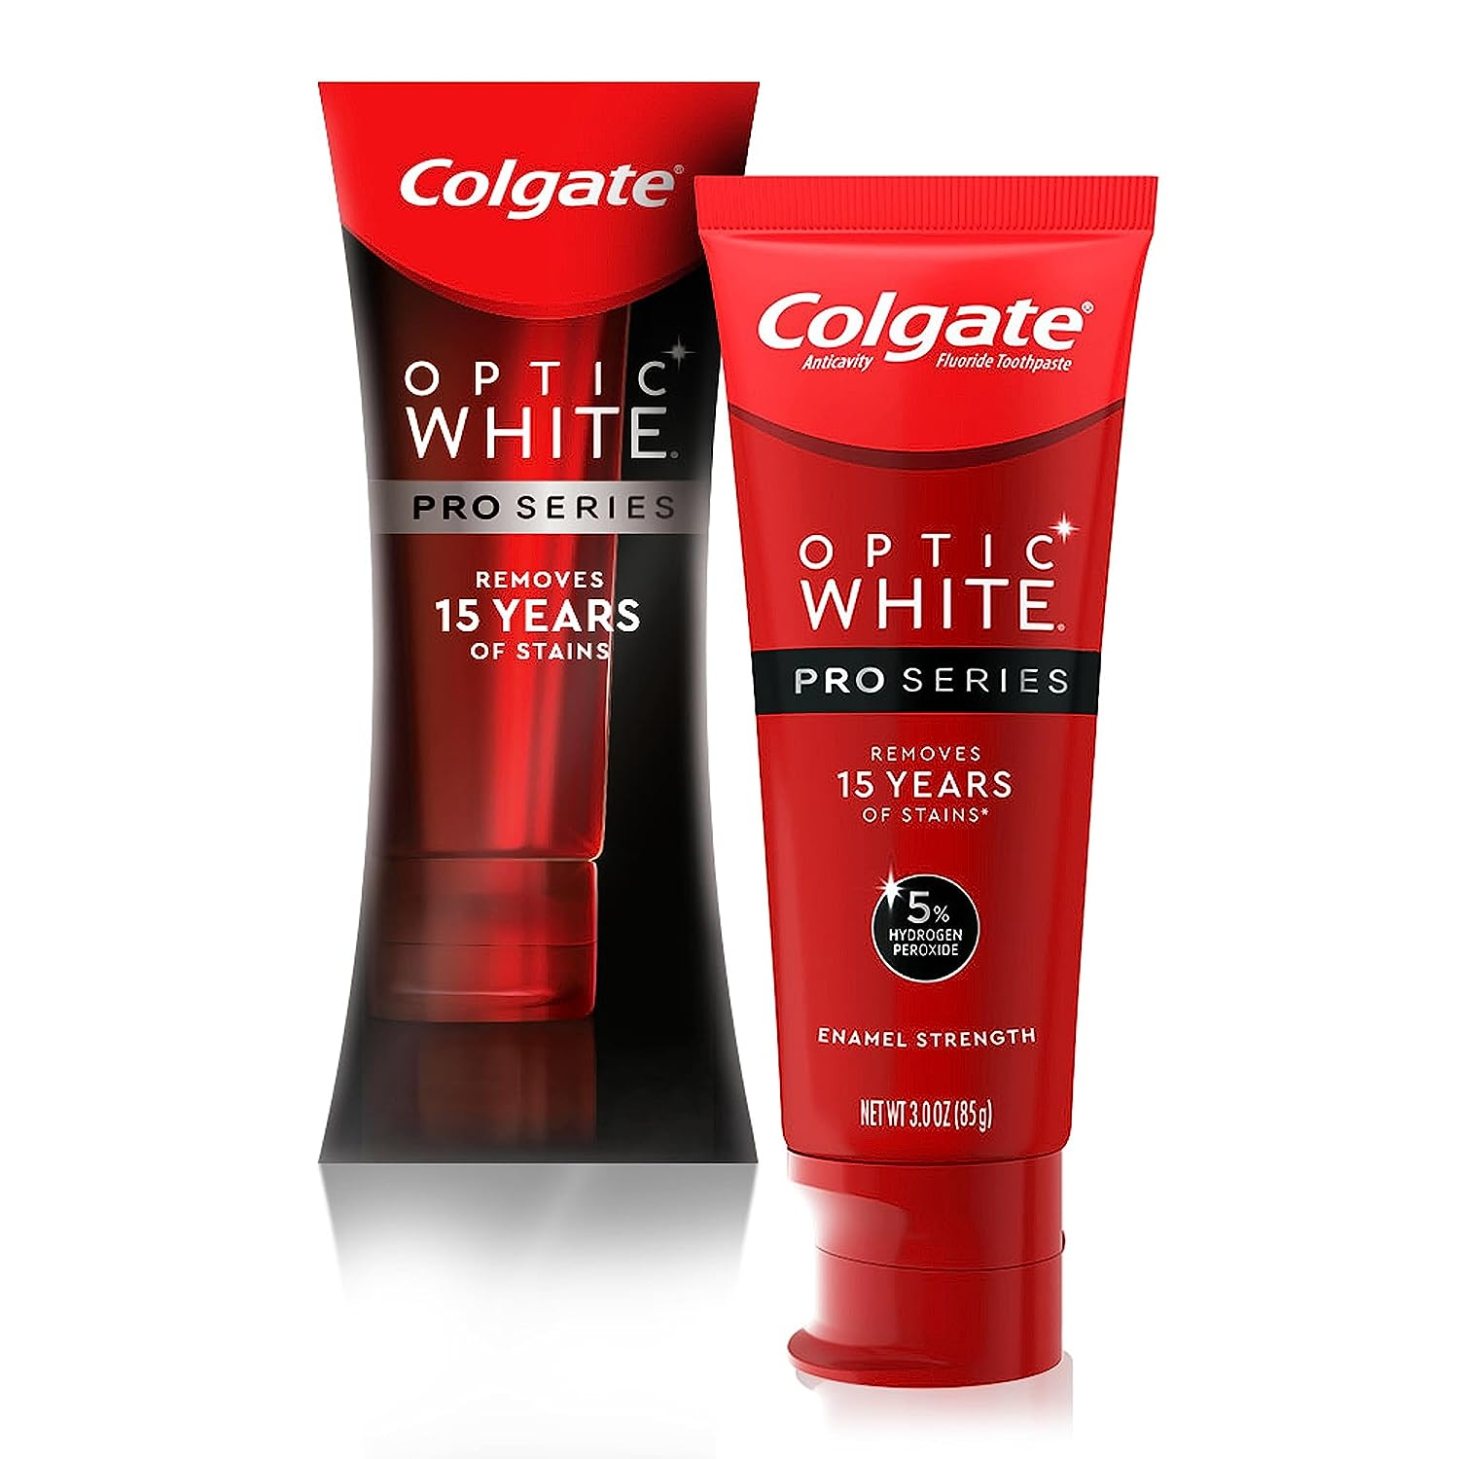 Colgate optic white, one of the best whitening toothpastes